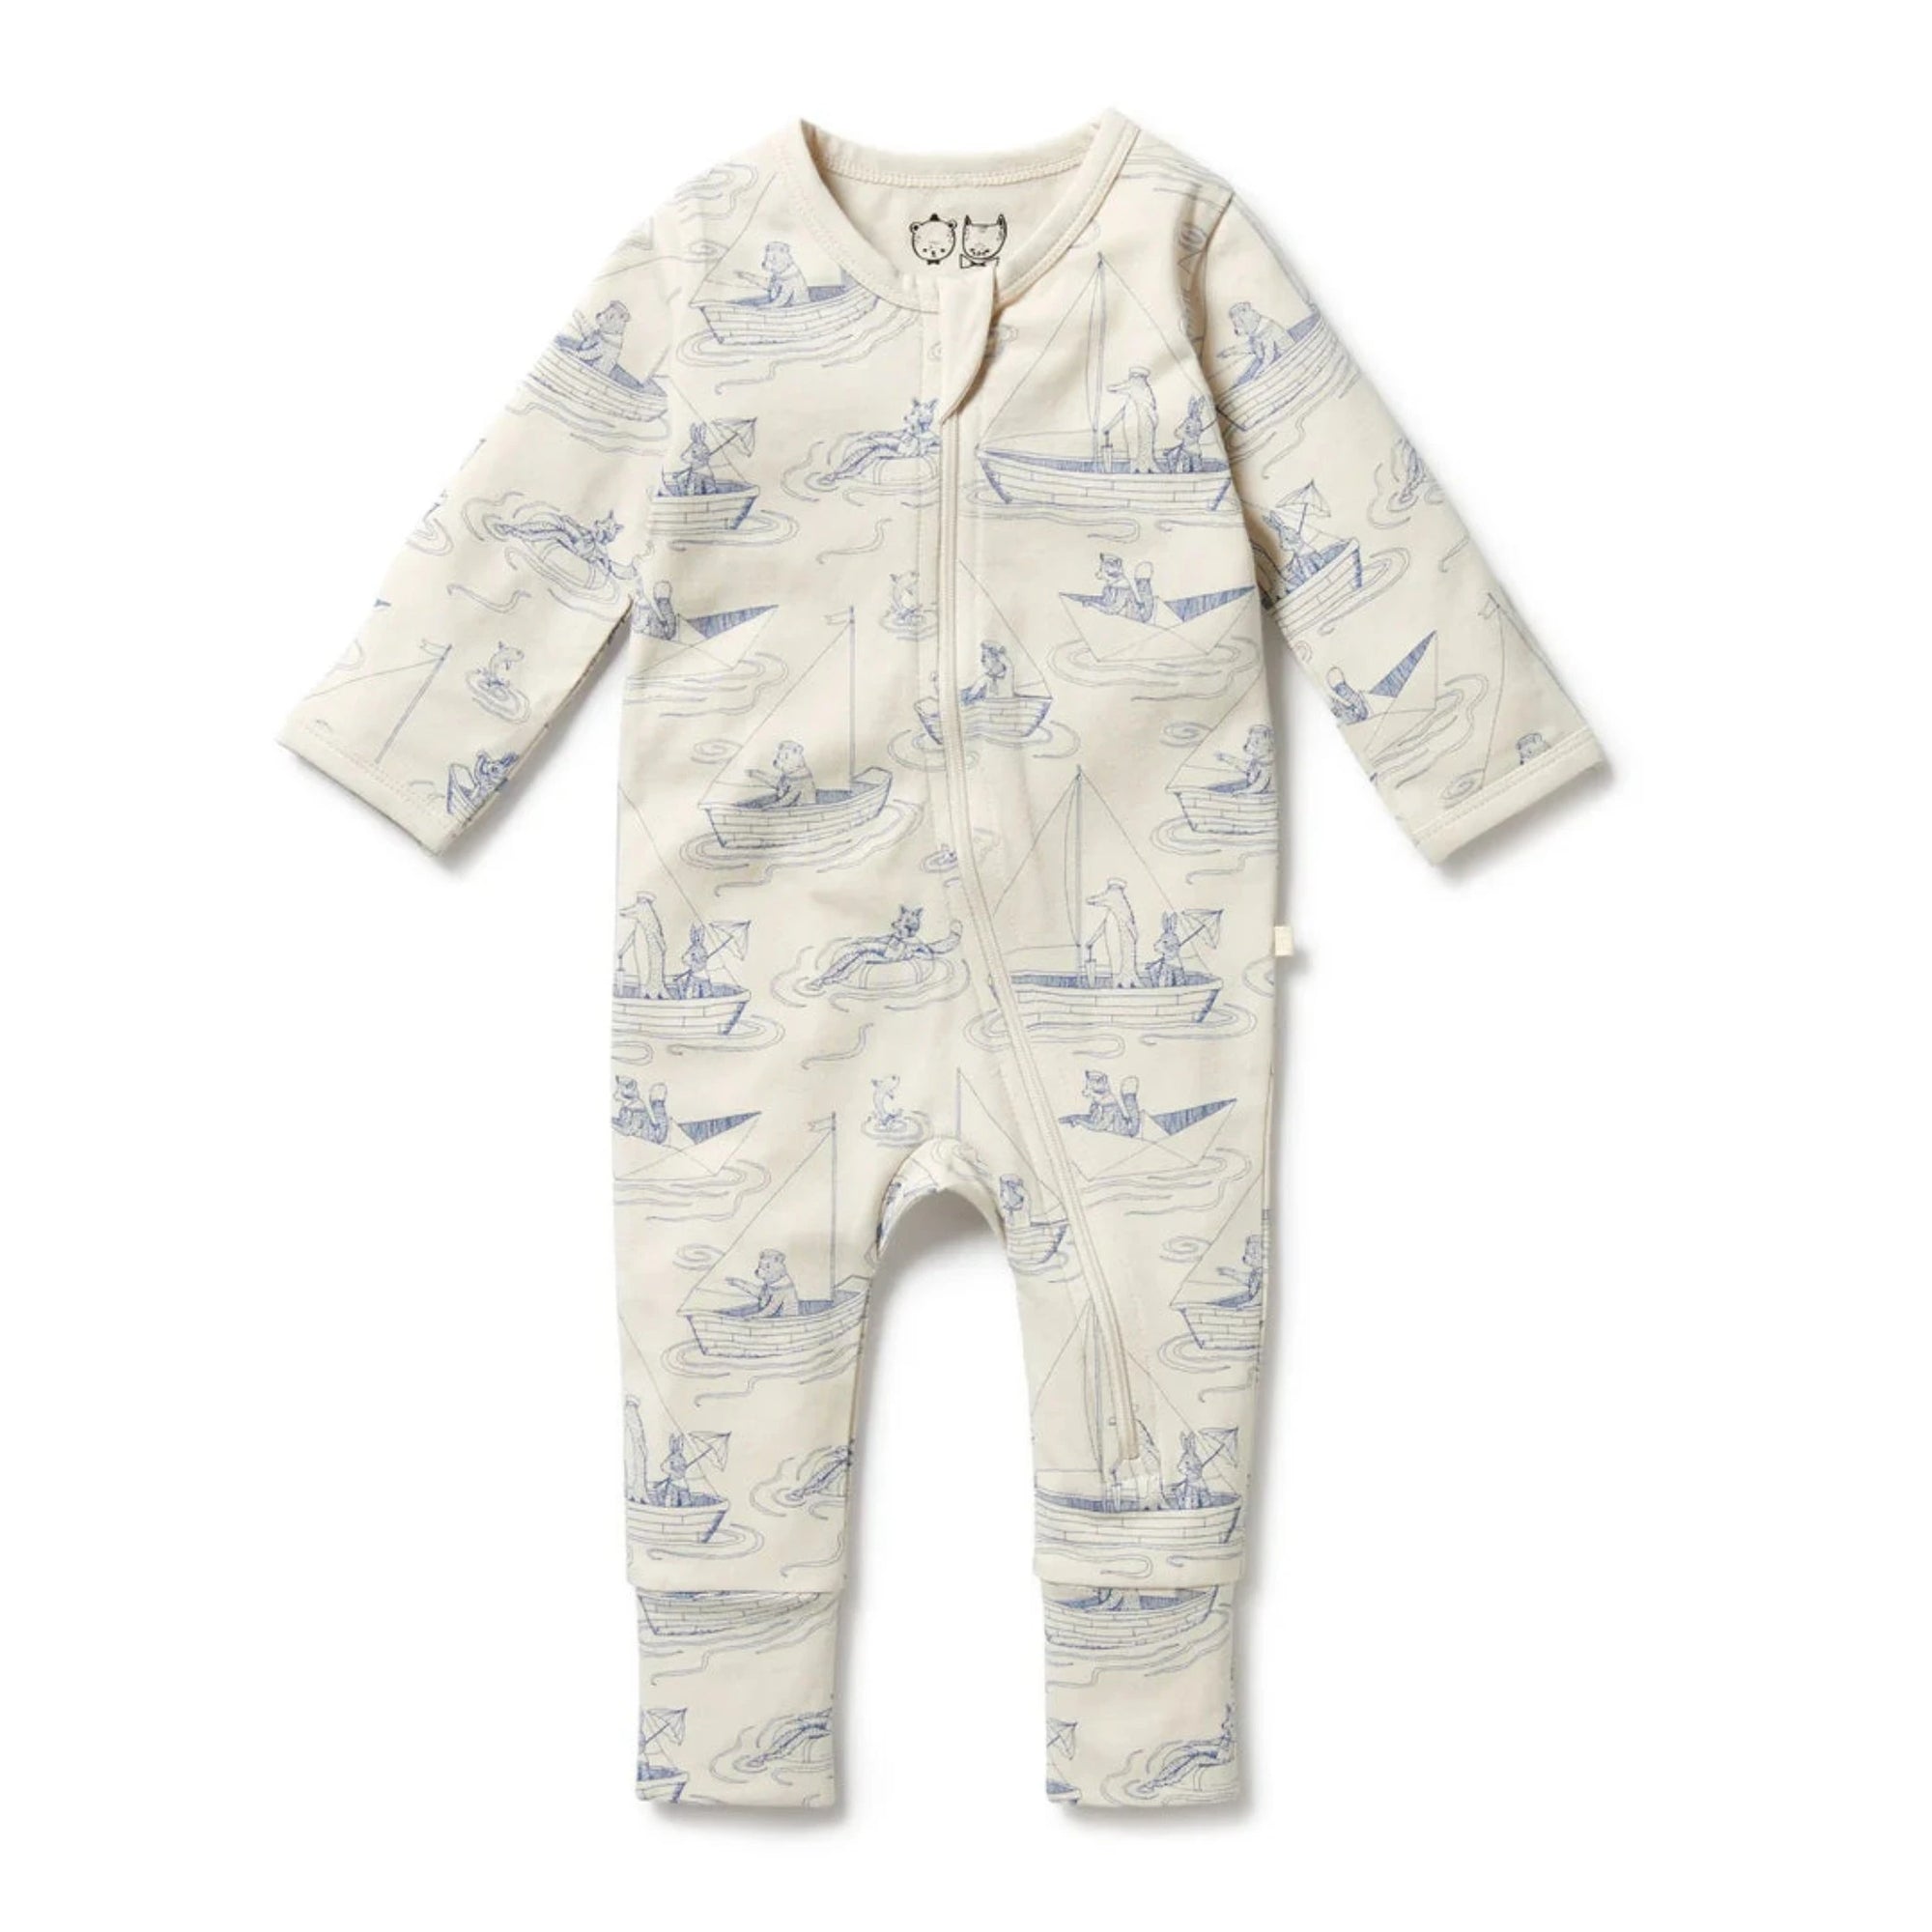 Wilson + Frenchy Organic Zipsuit with Feet - Sail Away